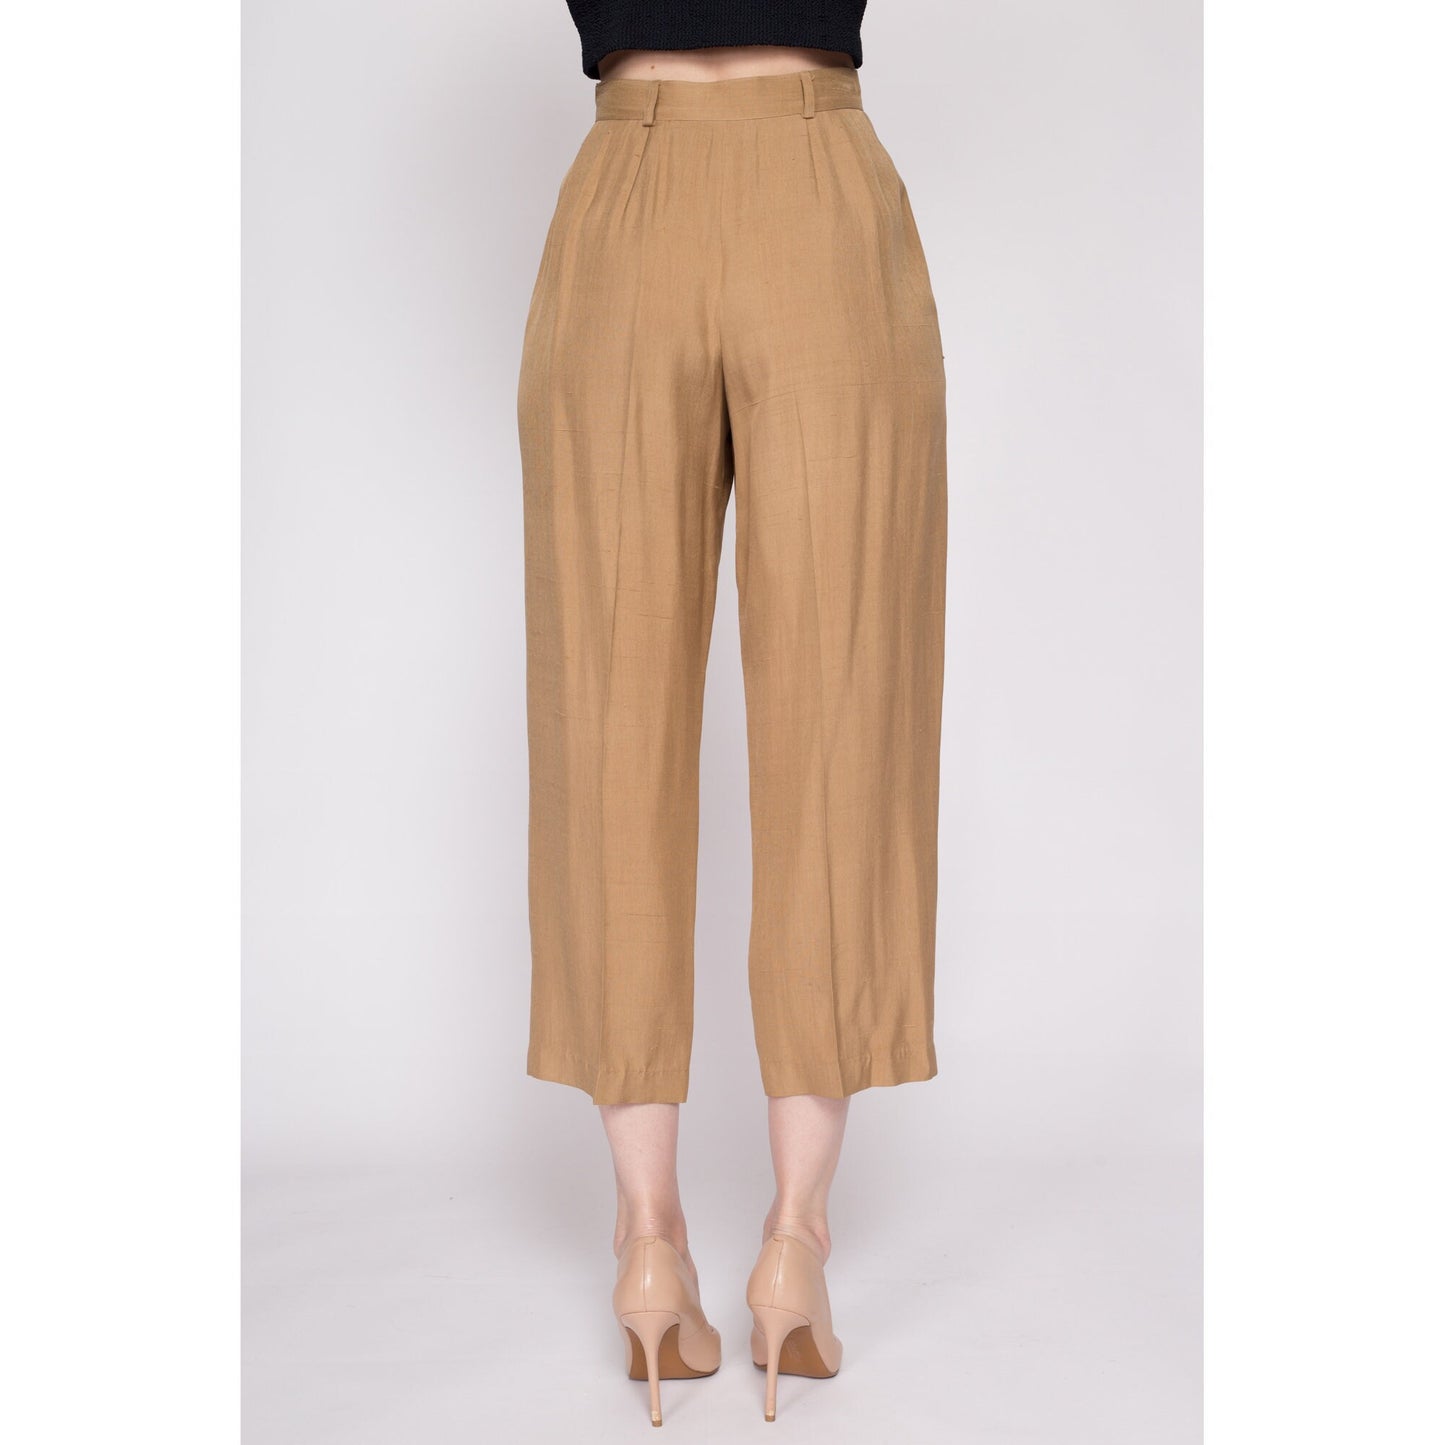 S| 90s Anne Klein Silk High Waisted Trousers - Petite Small, 25" | Vintage Minimalist Tan Pleated Tapered Leg Short Inseam Pants